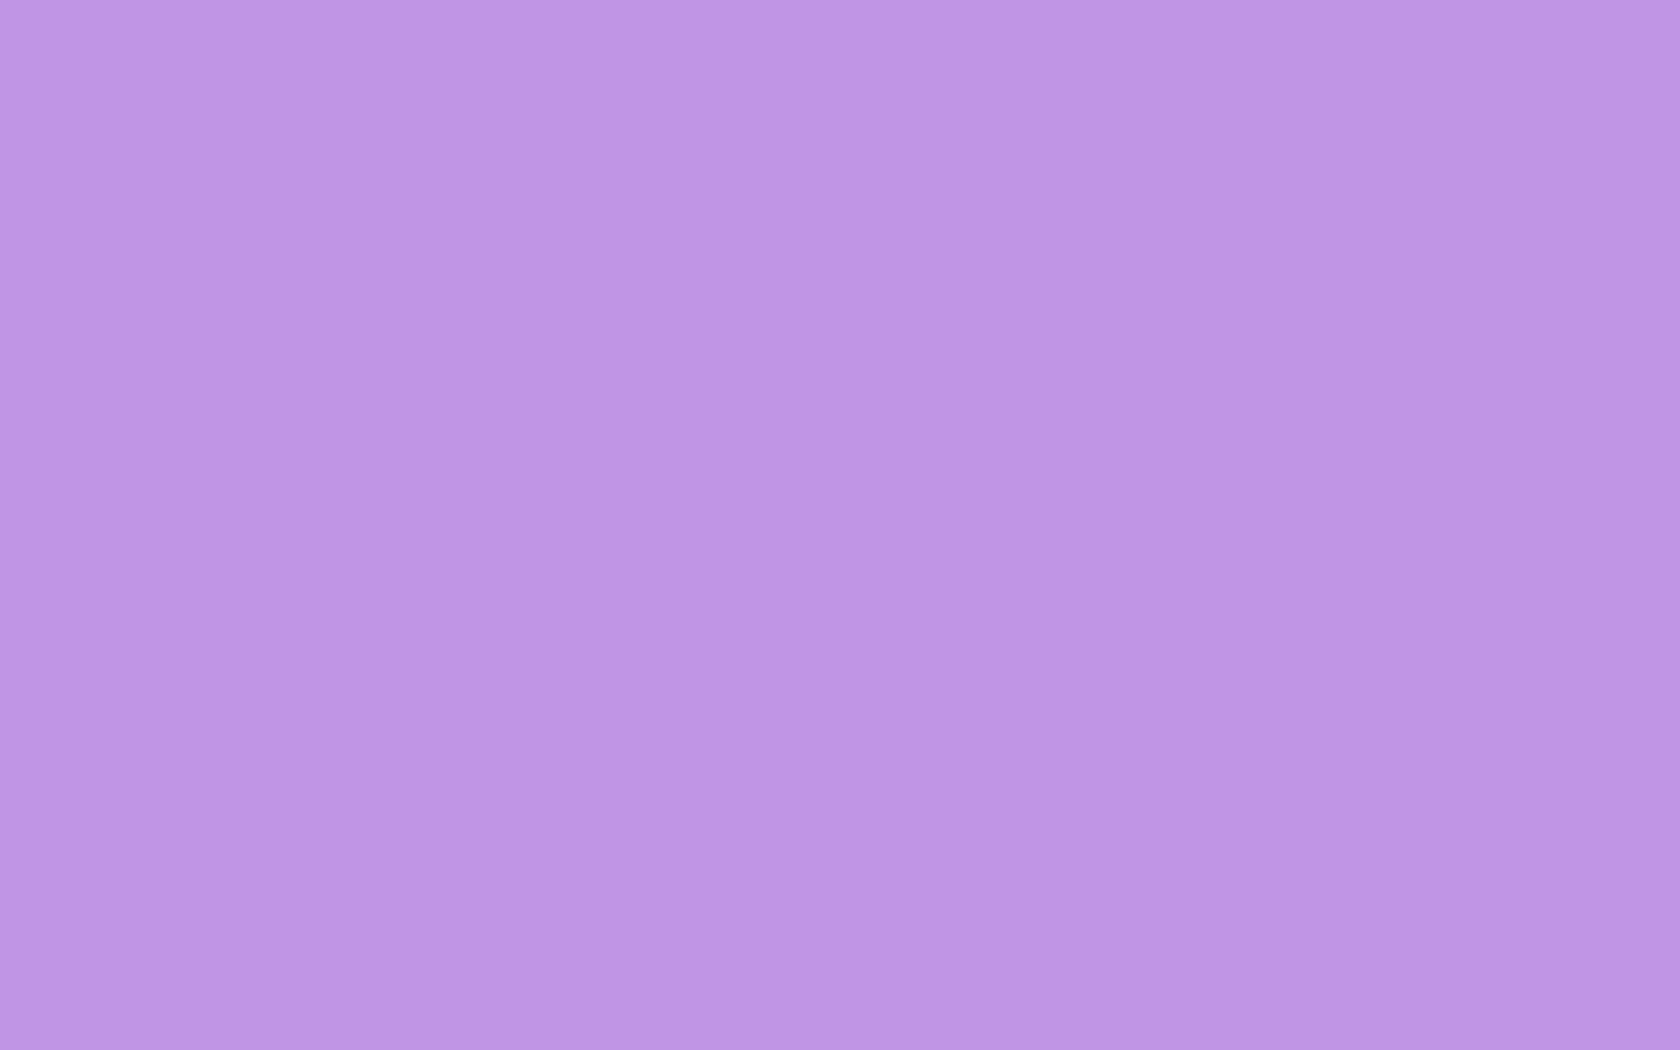 1680x1050 Bright Lavender Solid Color Background